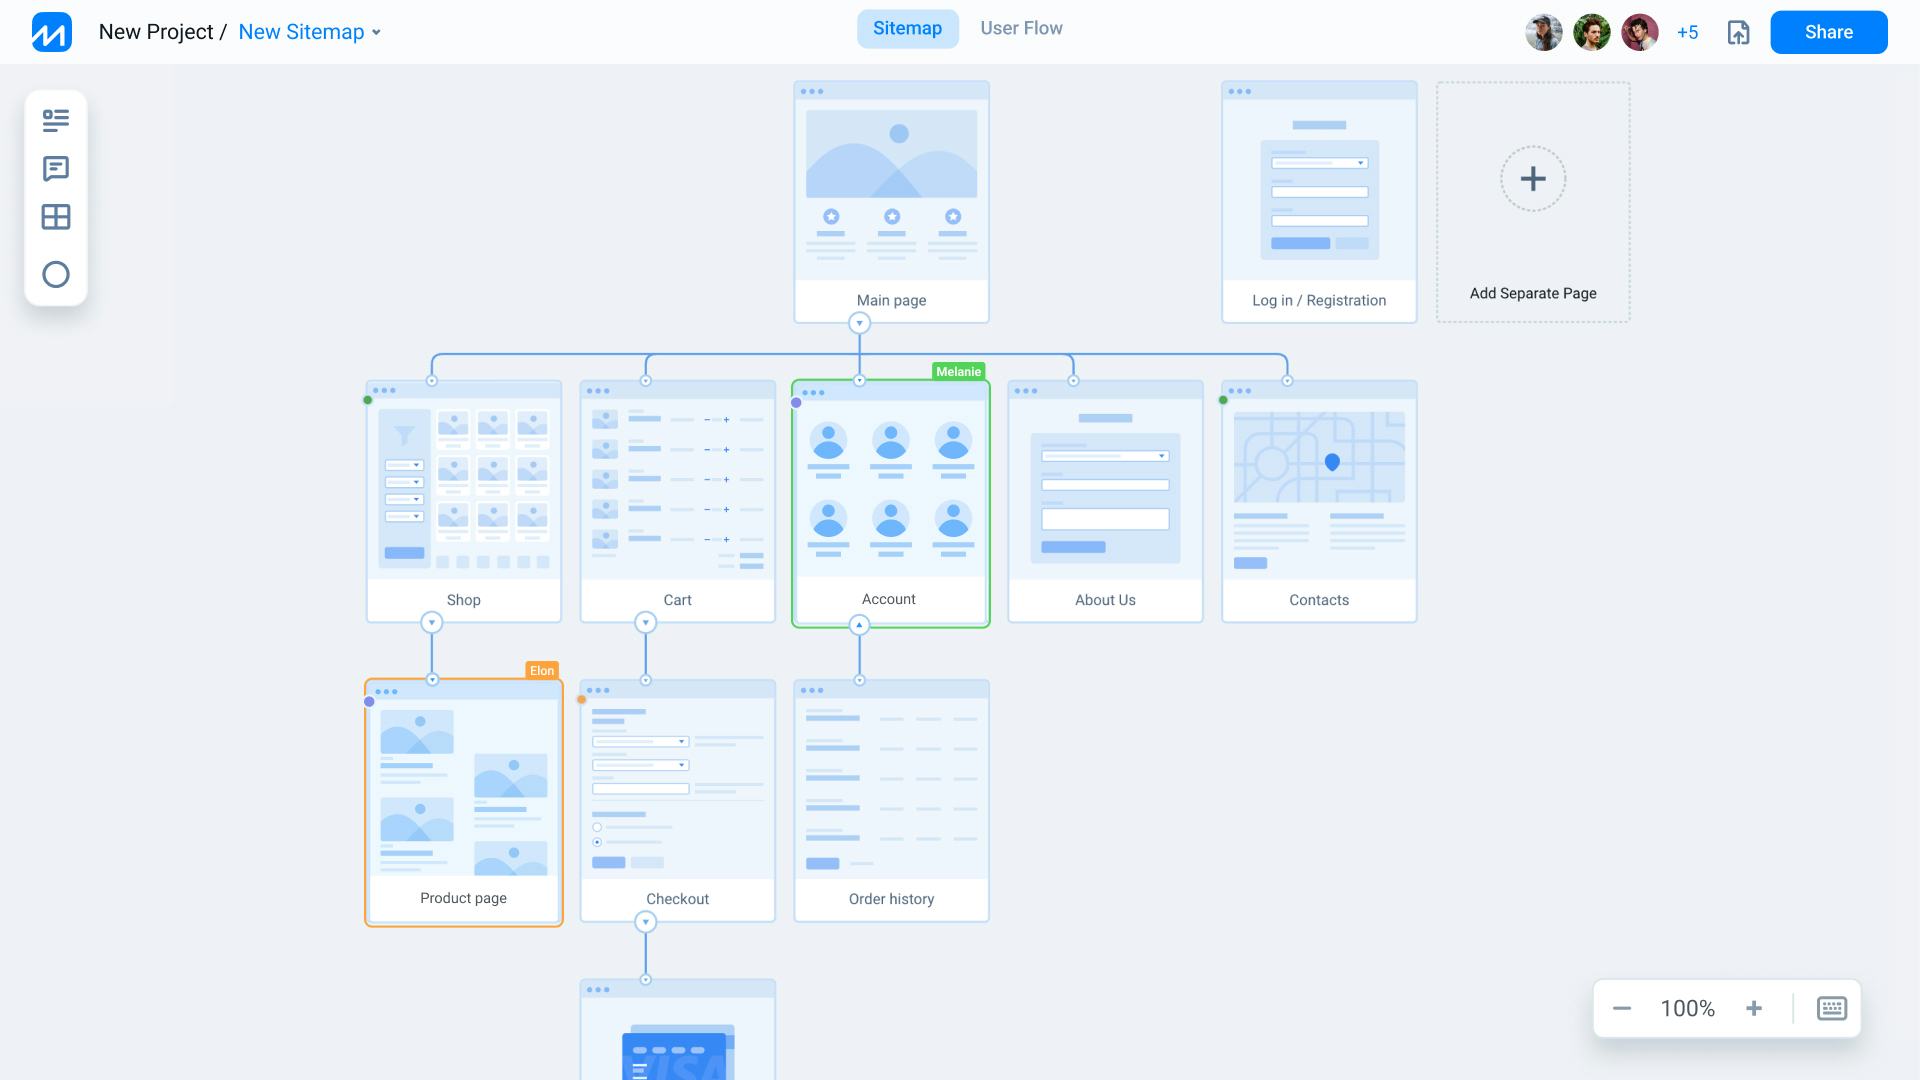 FlowMapp Software - Intuitive sitemaps for everyone on your team to see workflows at a glance.